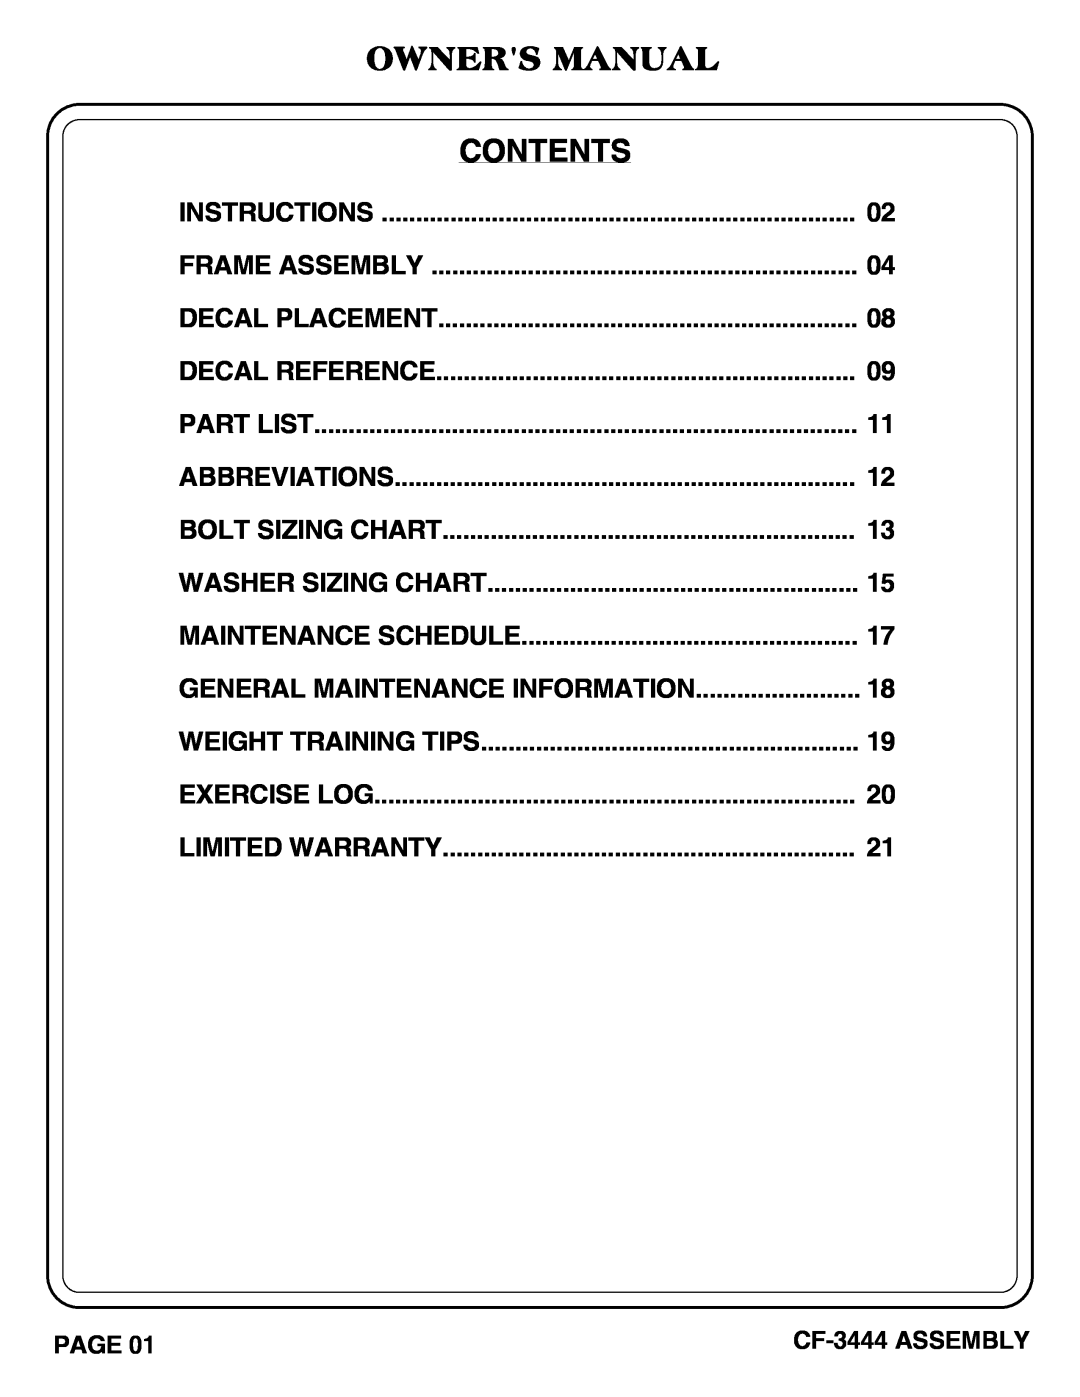 Hoist Fitness cf-3444 owner manual Owners Manual, Contents 